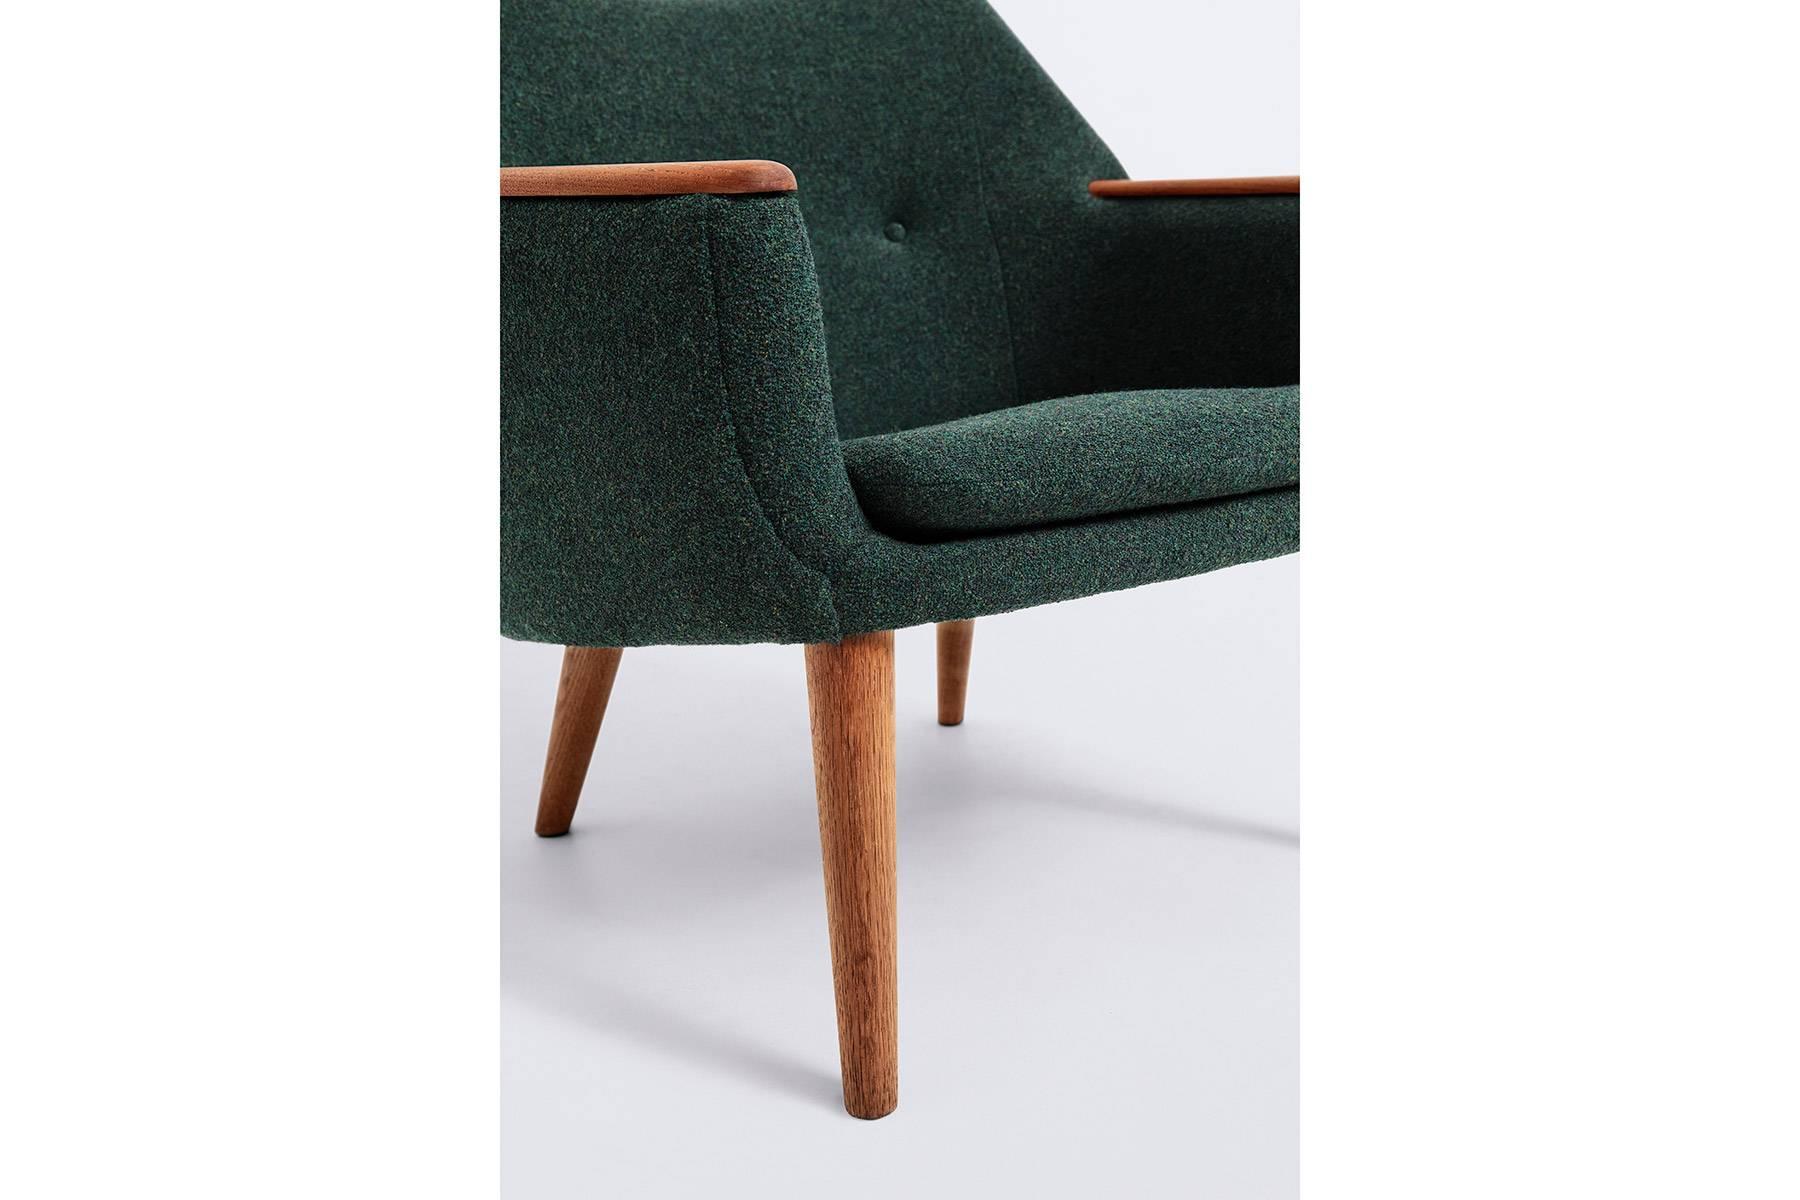 Pair of Lounge Chairs Designed by Kurt Østervig, 1958, Green Wool Upholstery In Excellent Condition For Sale In Copenhagen, DK